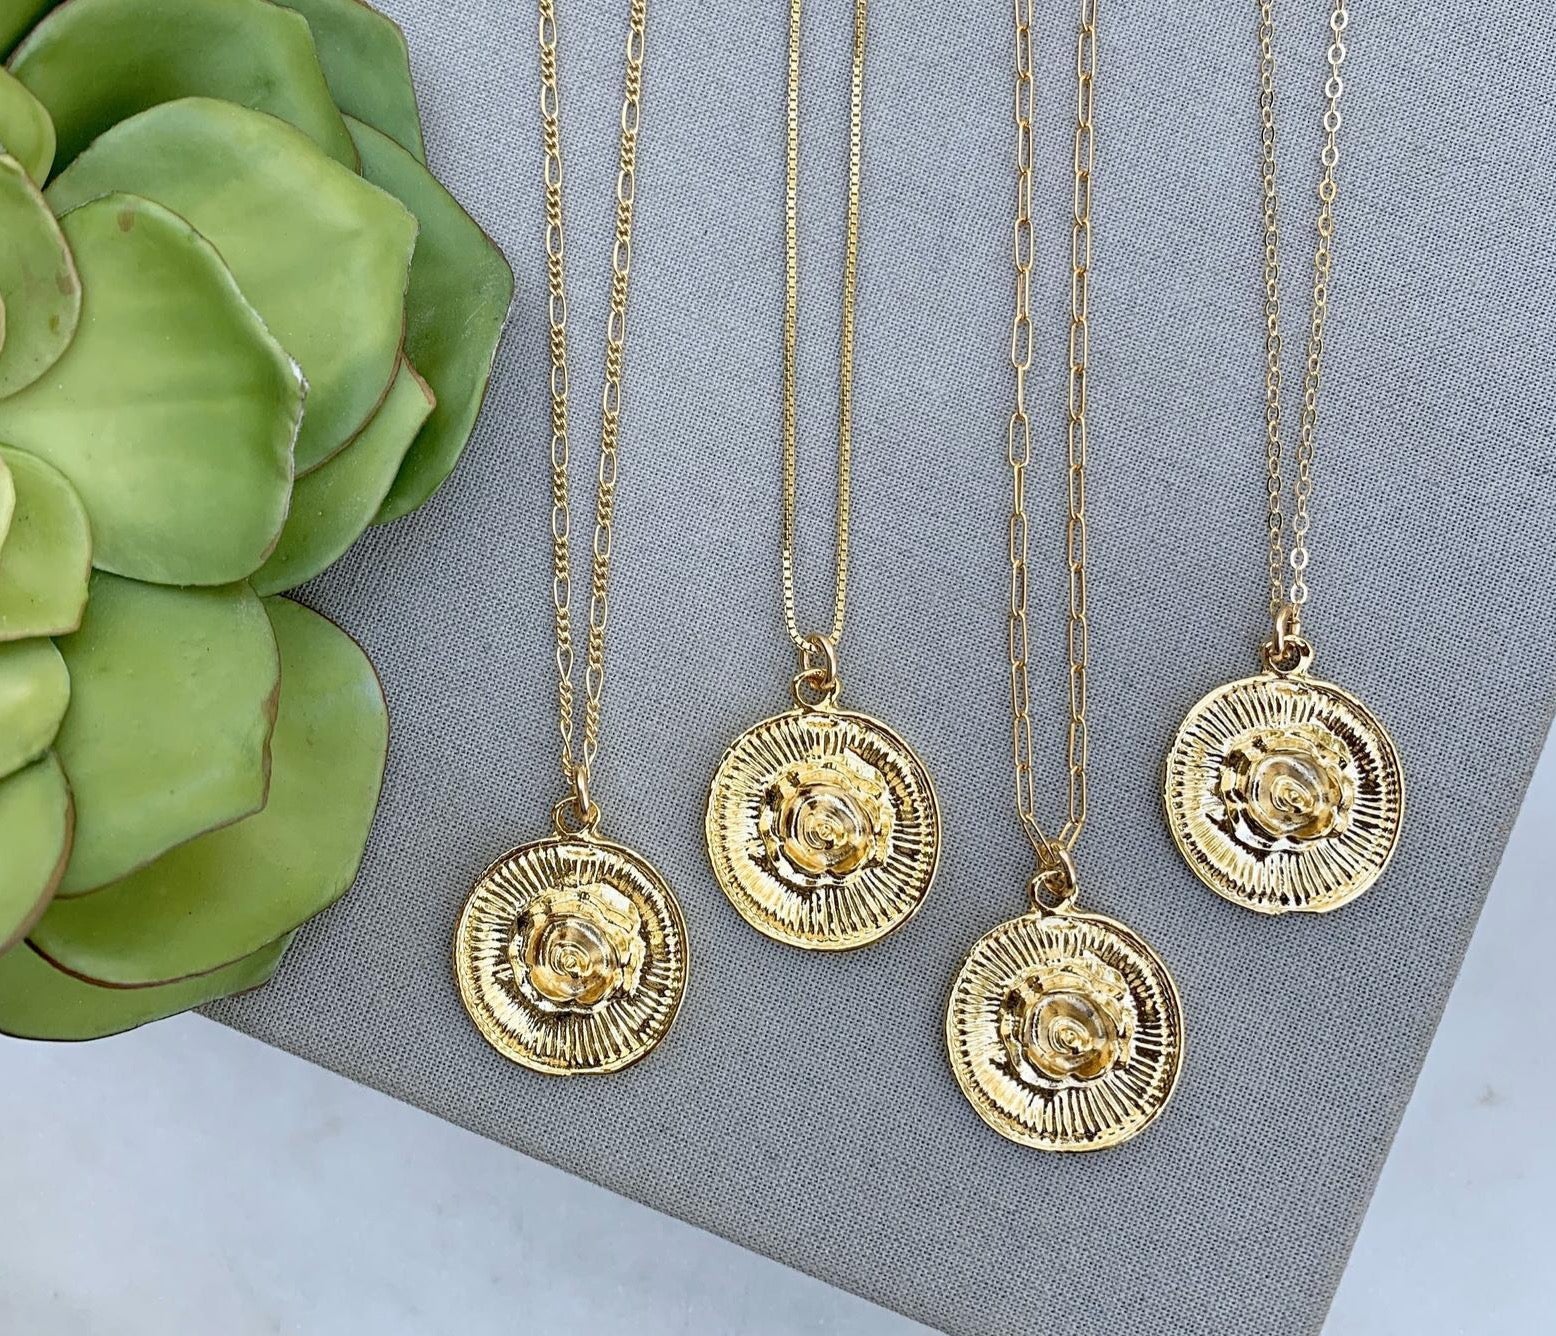 Coin Pendant Necklace 18K Gold Plated Vintage Medallion Coin